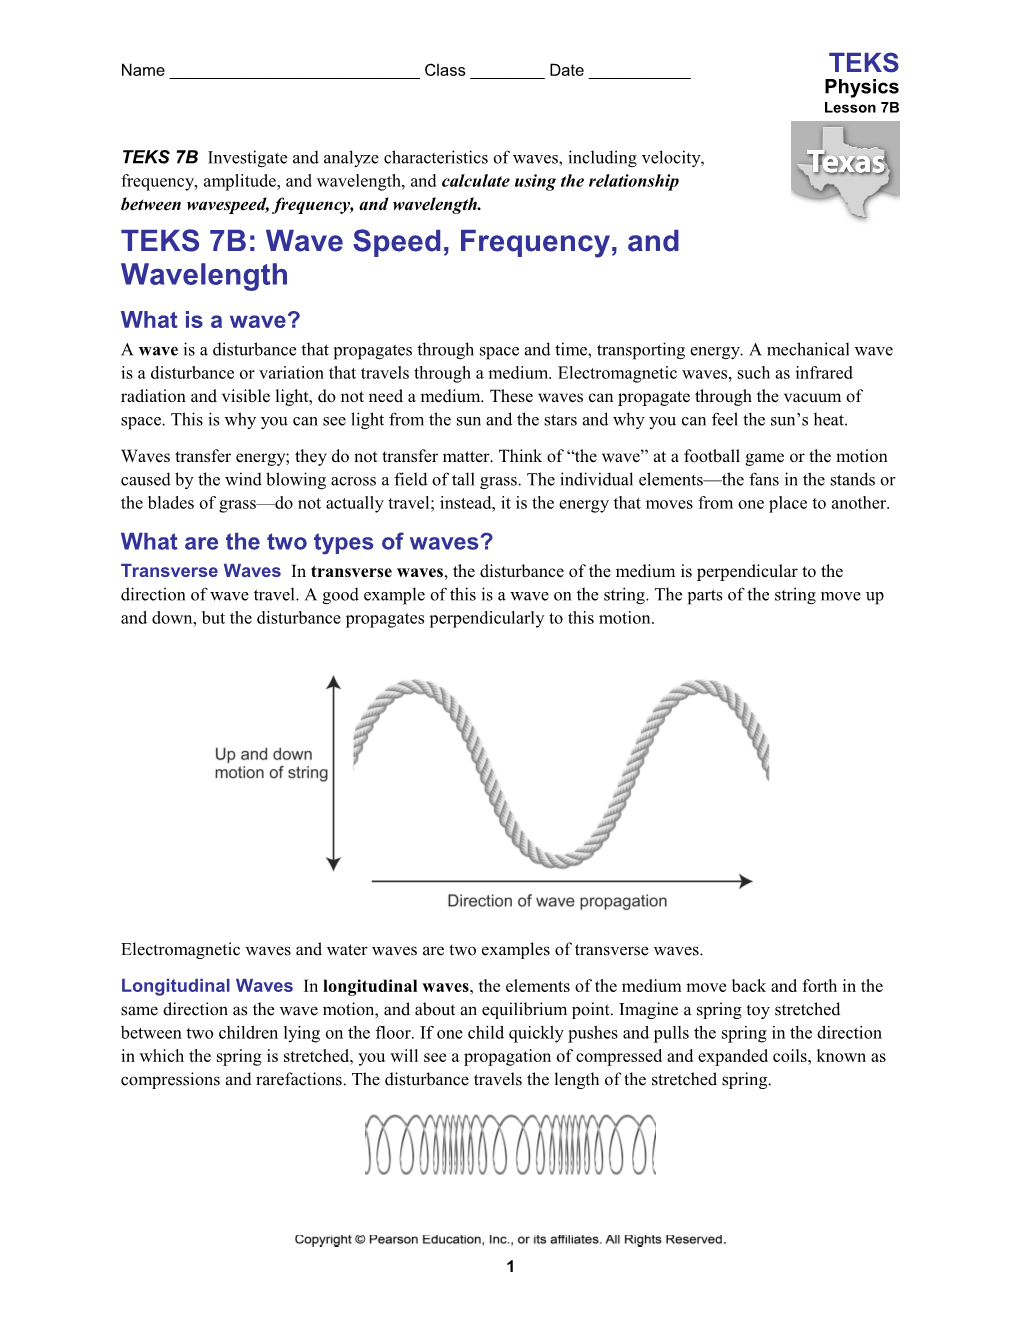 TEKS 7B: Wave Speed, Frequency, and Wavelength